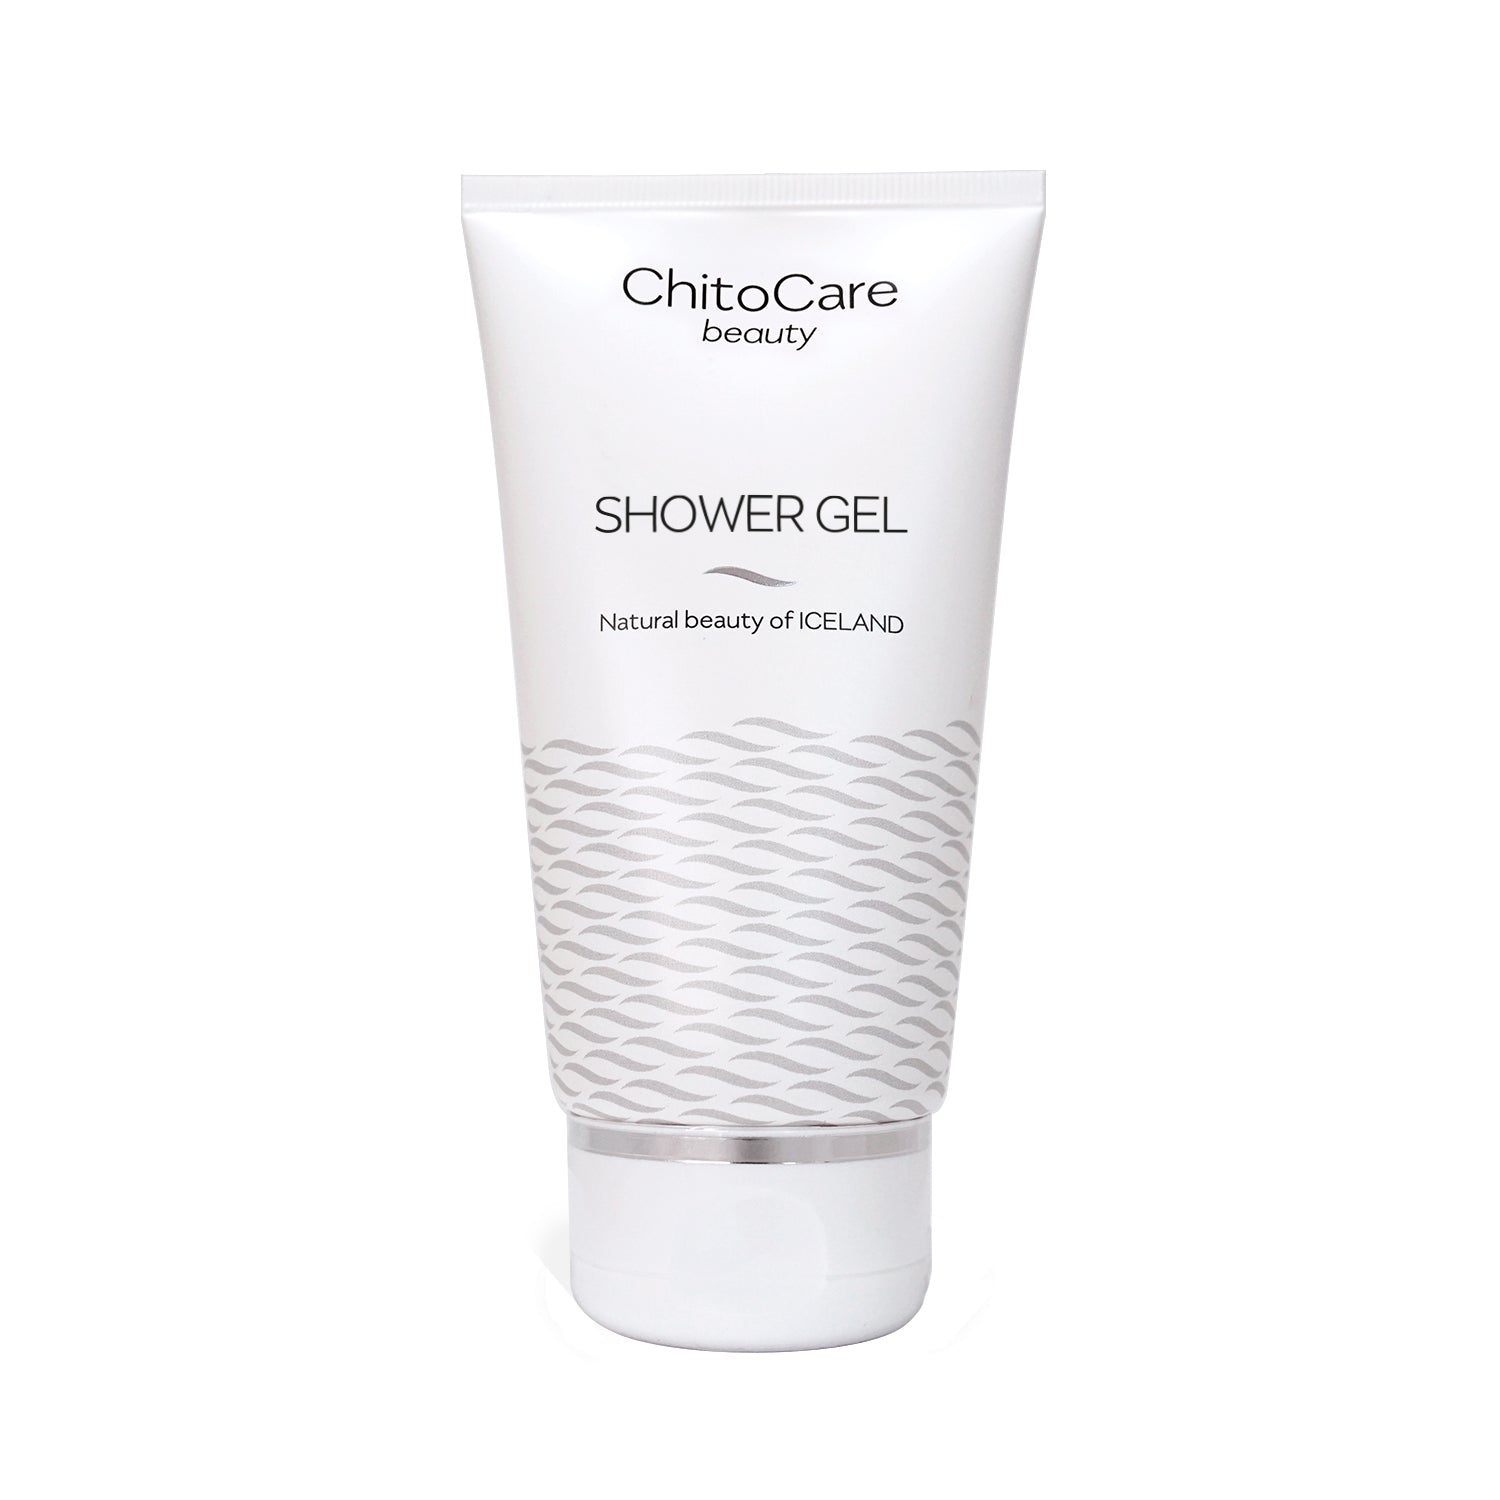 ChitoCare Beauty Shower Gel